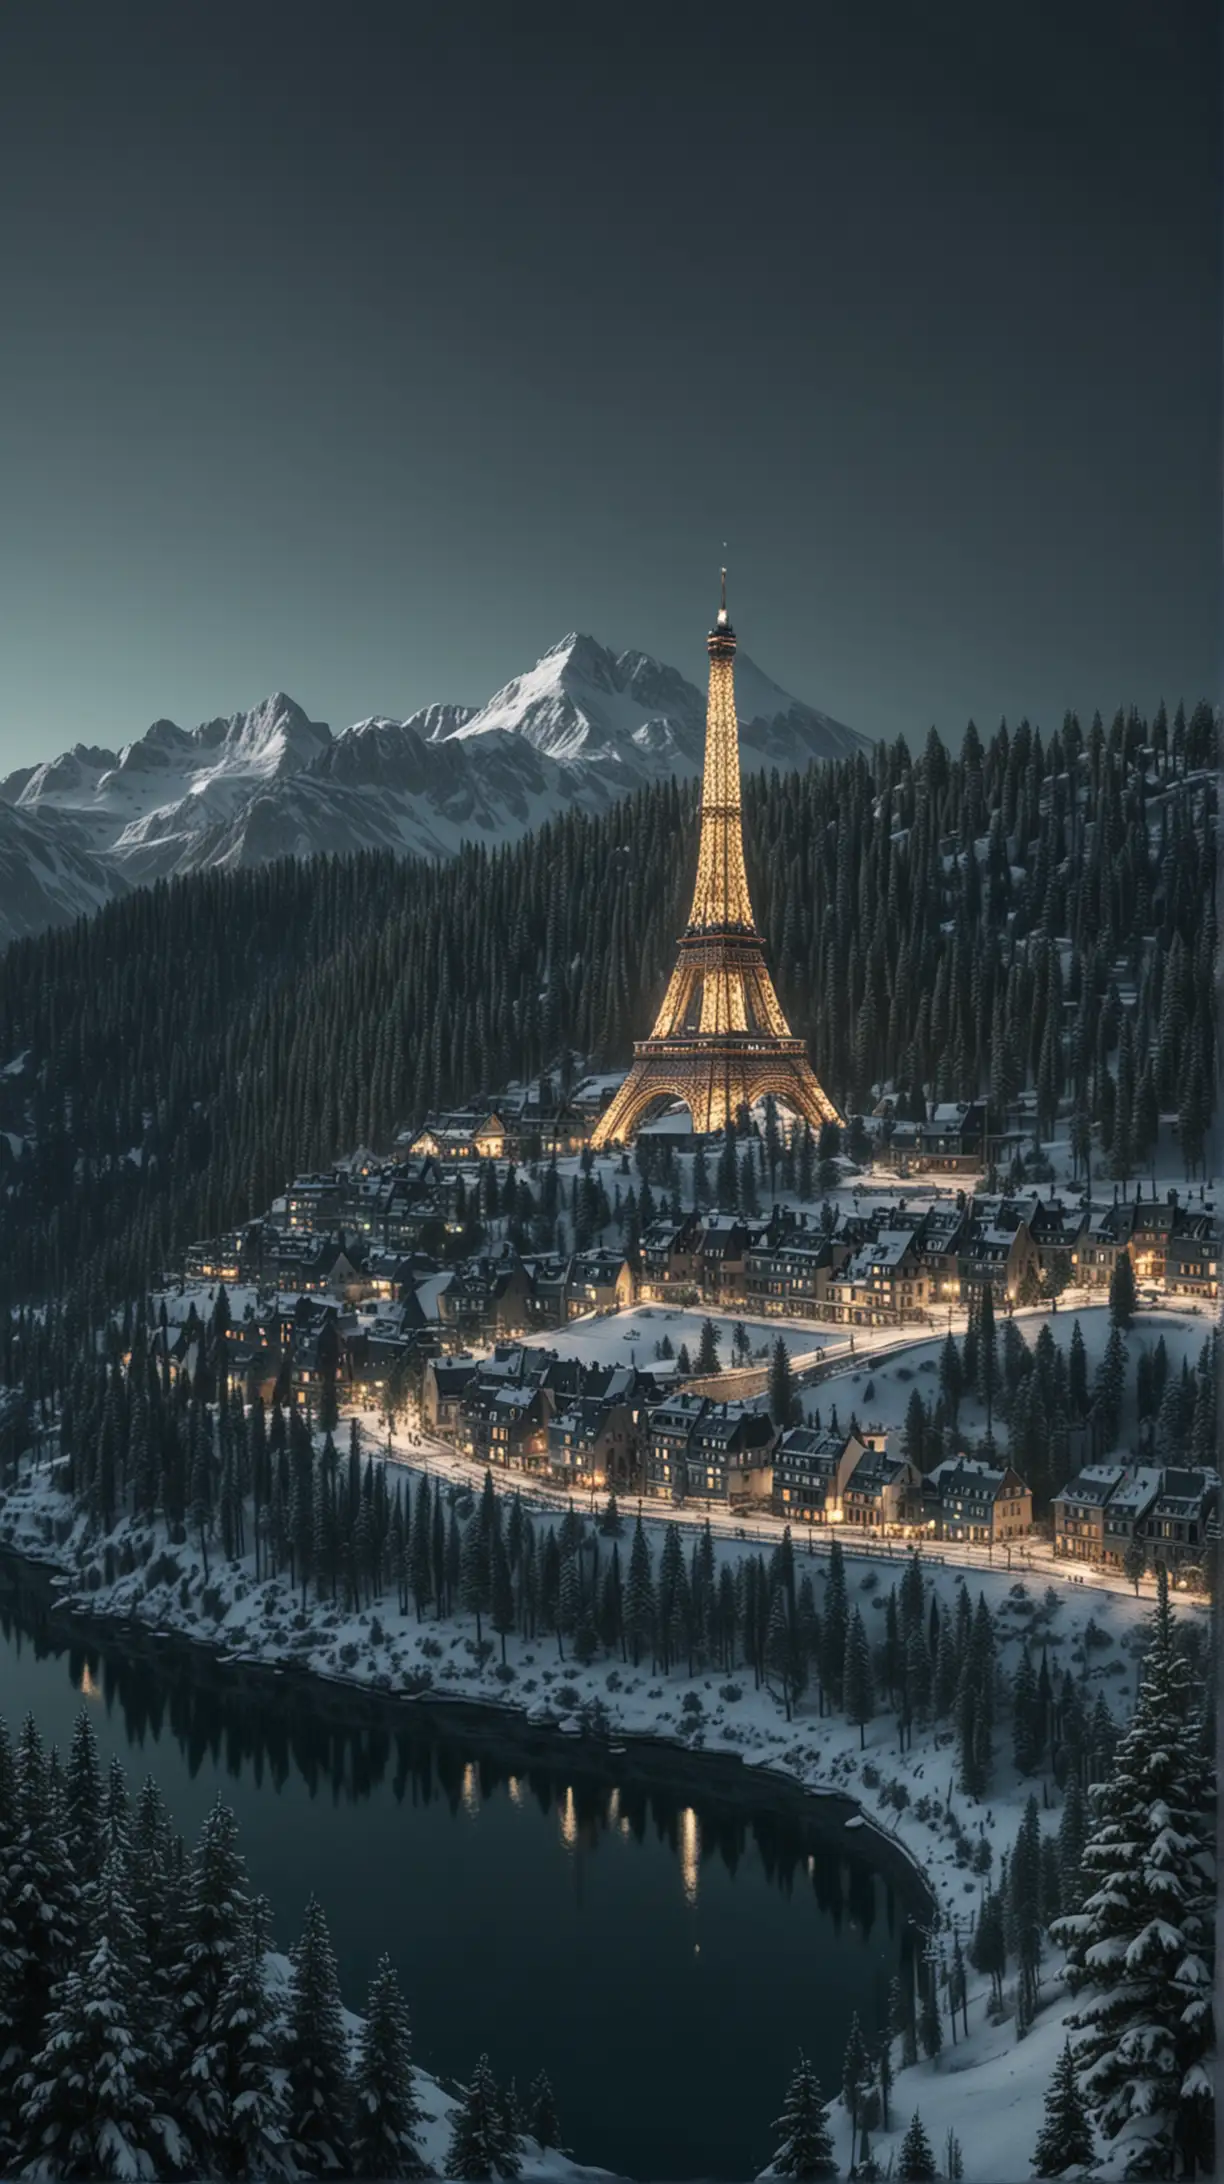 Snow Mountain Landscape with Pine Trees Lighted Houses and Eiffel Tower in Dusk